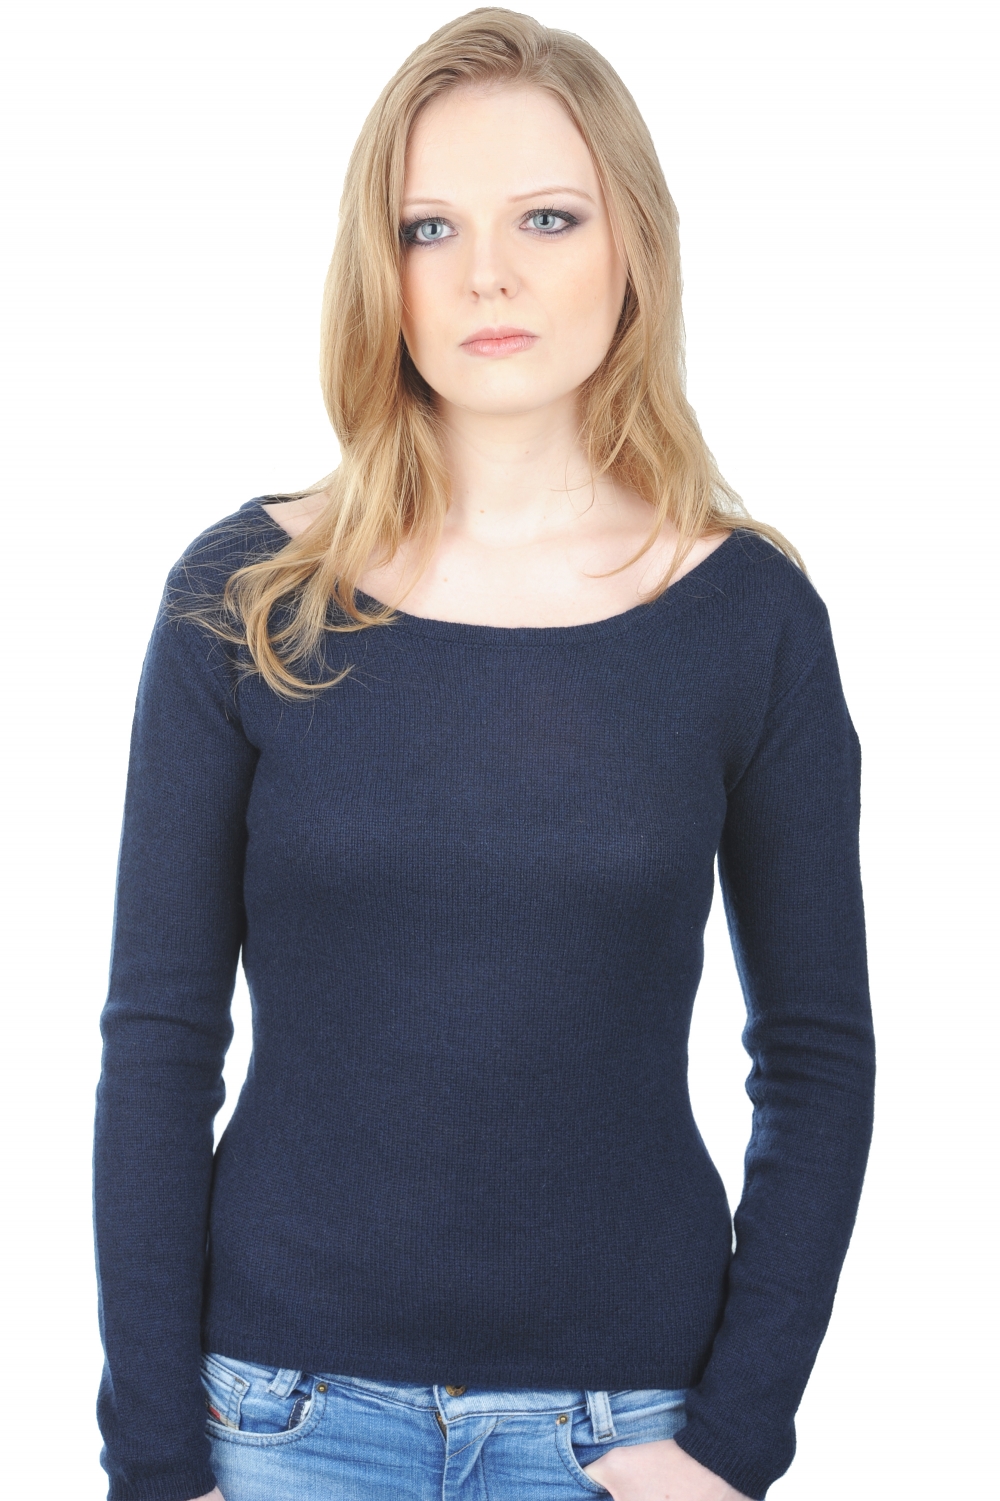 Cashmere ladies basic sweaters at low prices caleen dress blue s